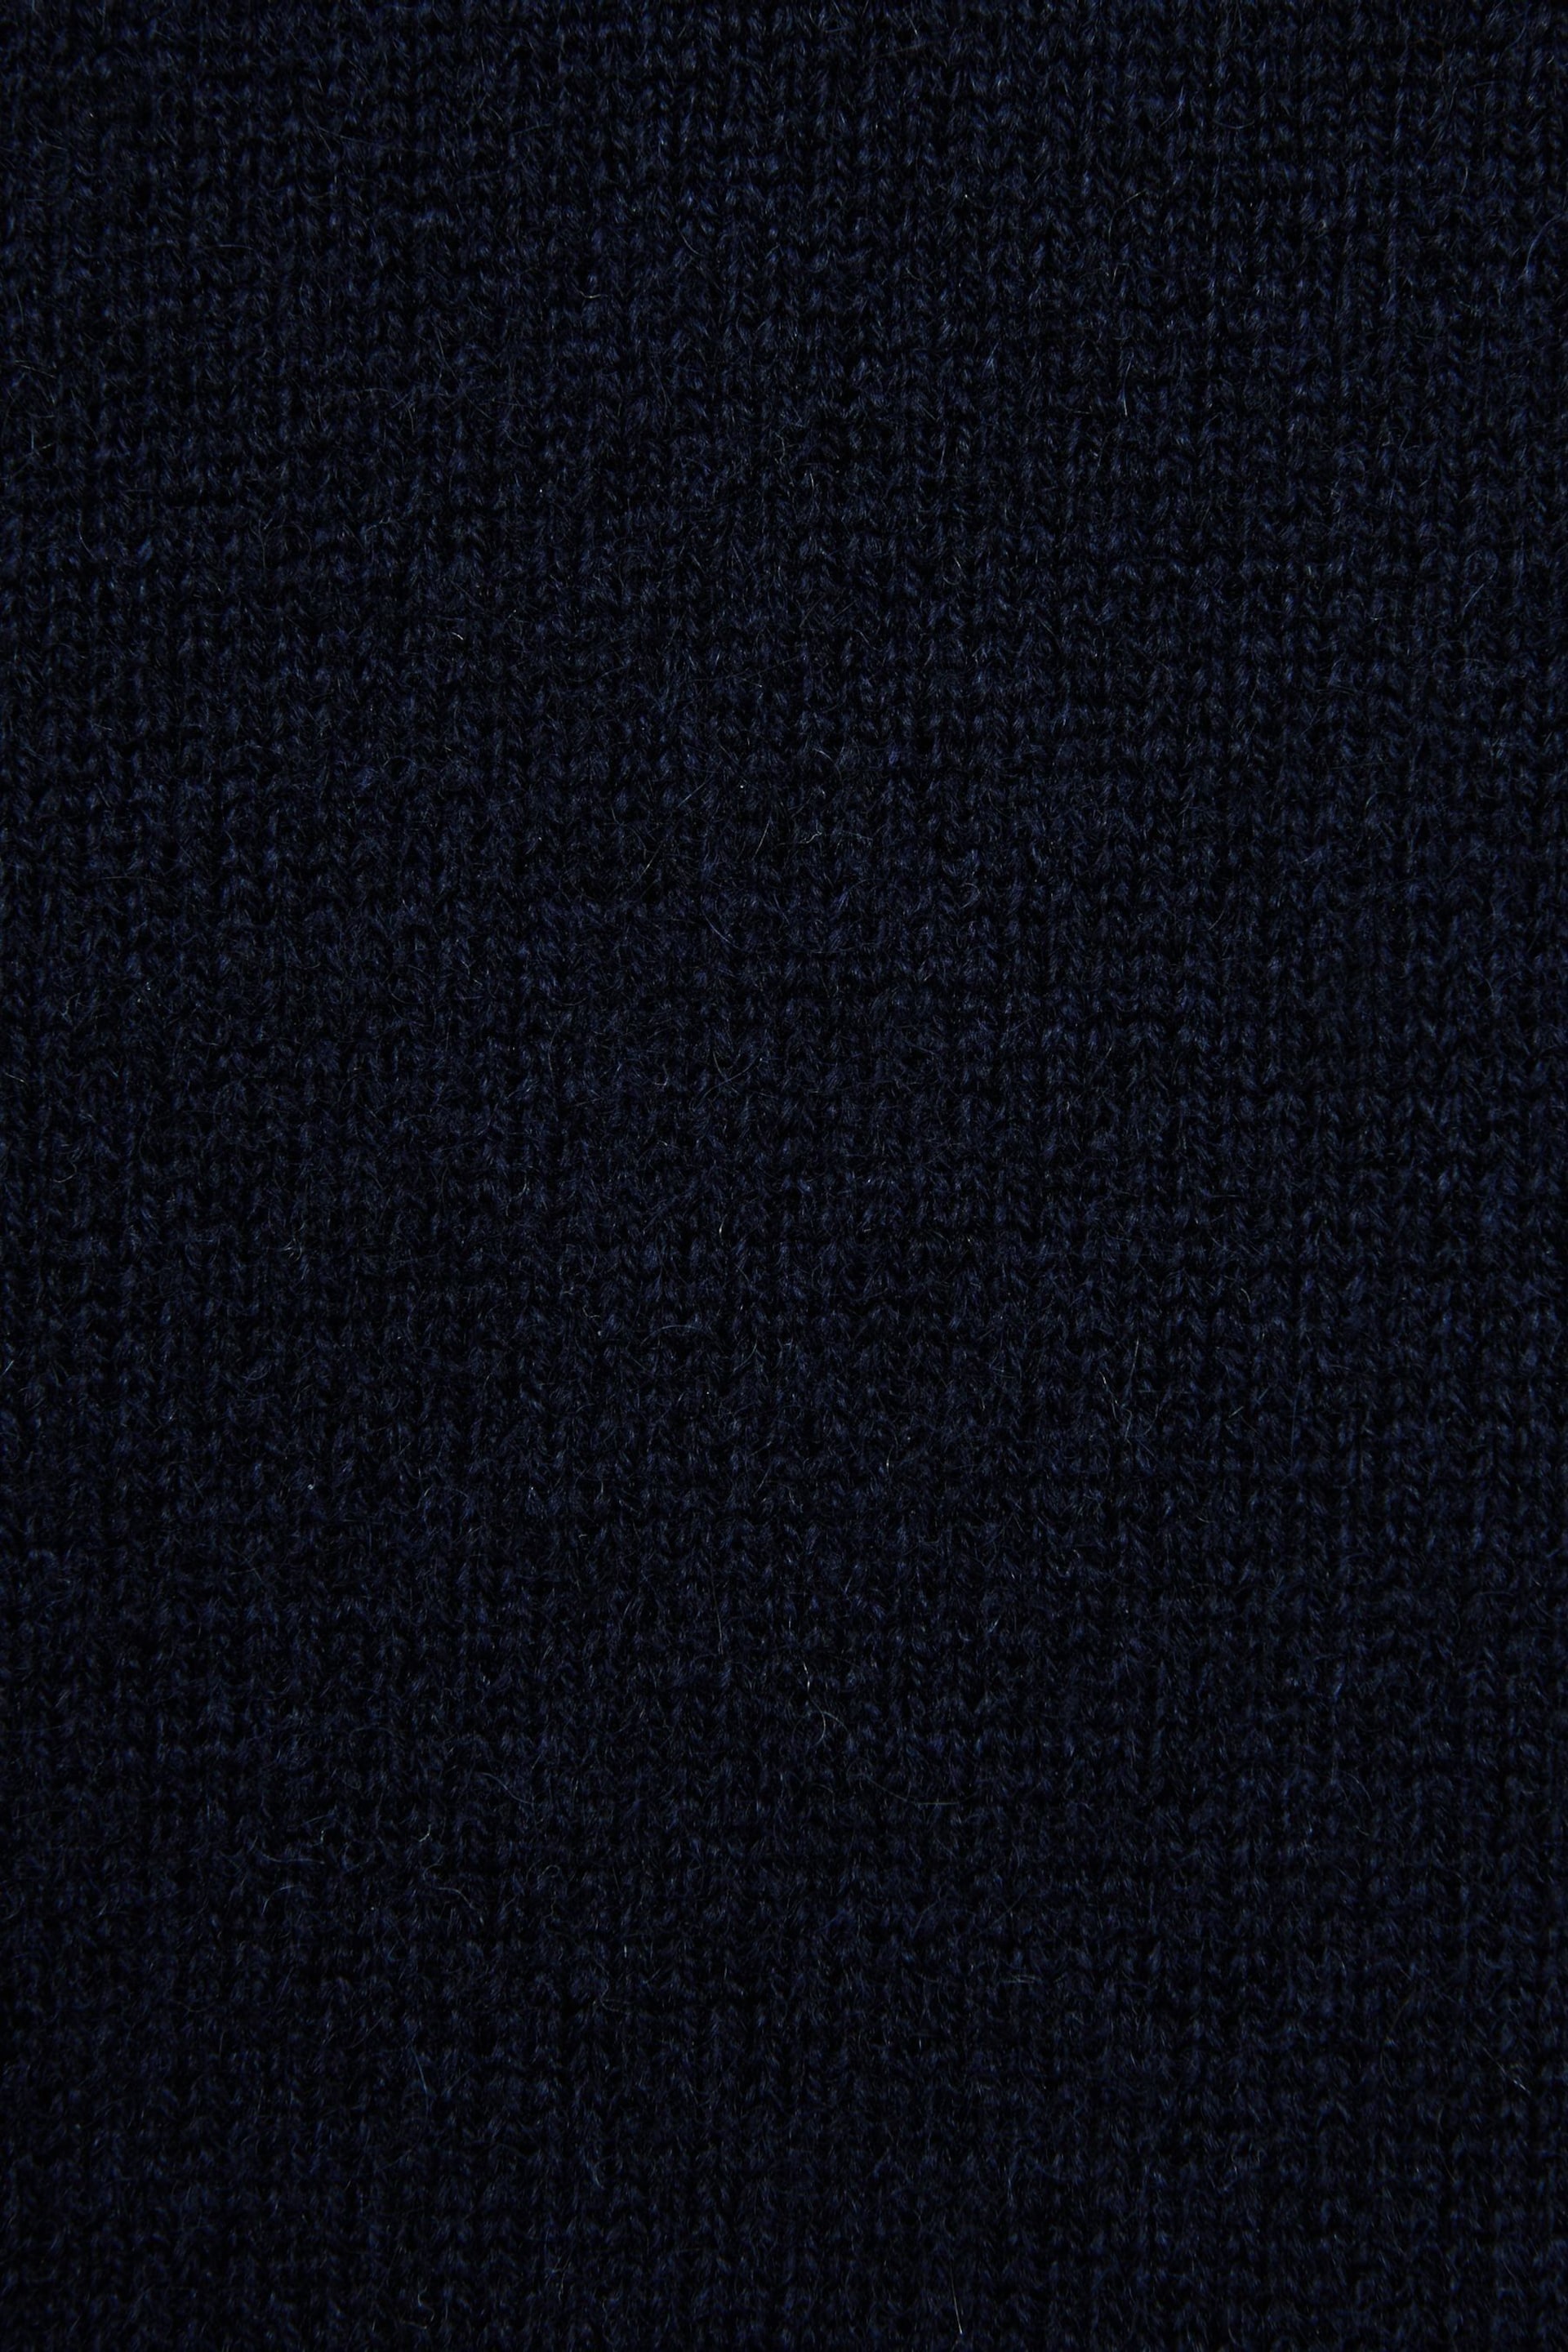 Reiss Navy Regal Cashmere Roll Neck Jumper - Image 6 of 6